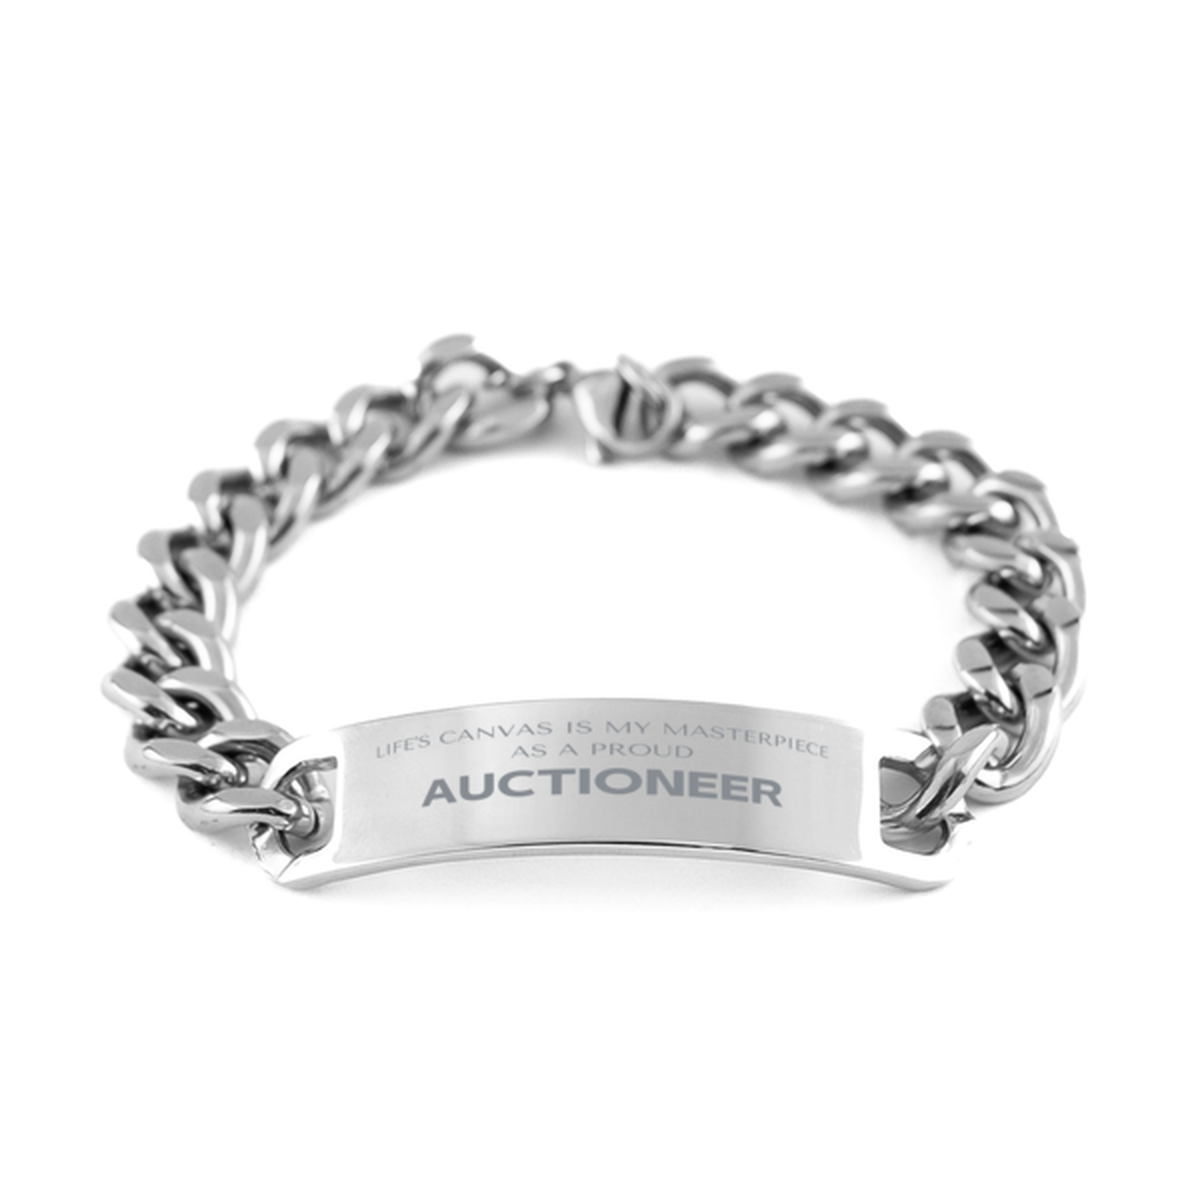 Proud Auctioneer Gifts, Life's canvas is my masterpiece, Epic Birthday Christmas Unique Cuban Chain Stainless Steel Bracelet For Auctioneer, Coworkers, Men, Women, Friends